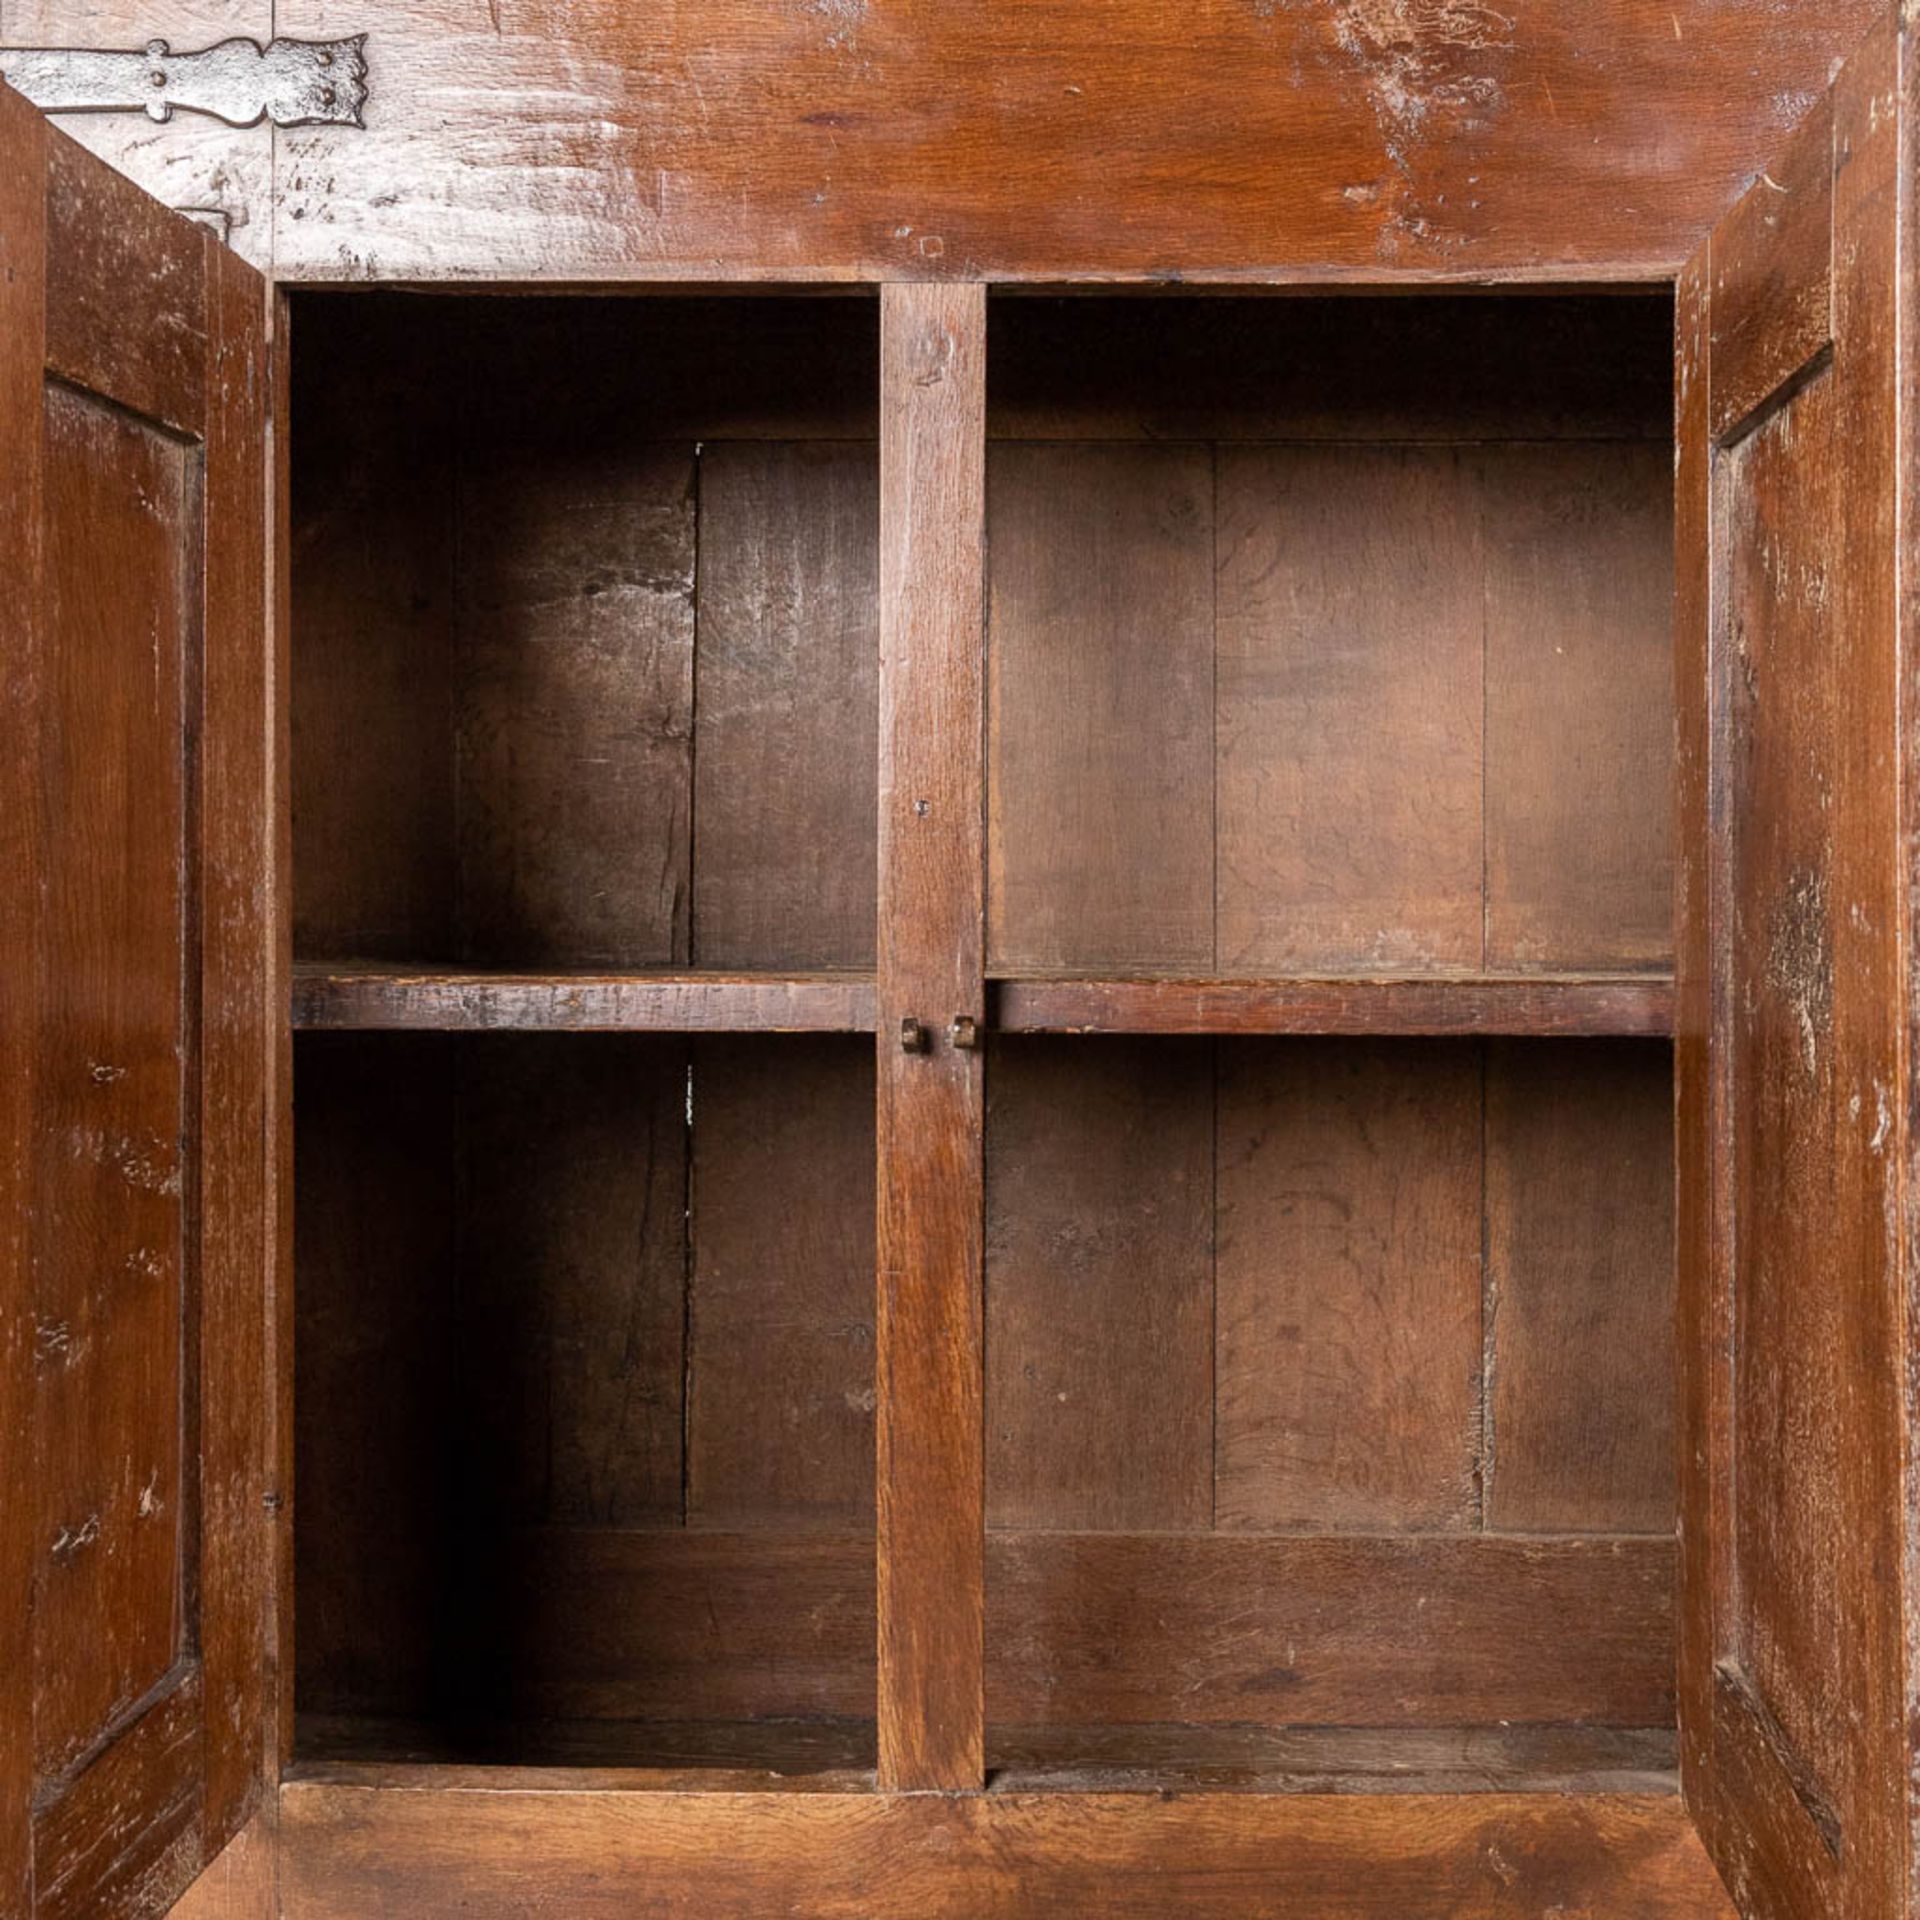 An antique three-door cabinet with sculptured oak doors, France, 17th C. (L: 55 x W: 175 x H: 151 cm - Image 21 of 23